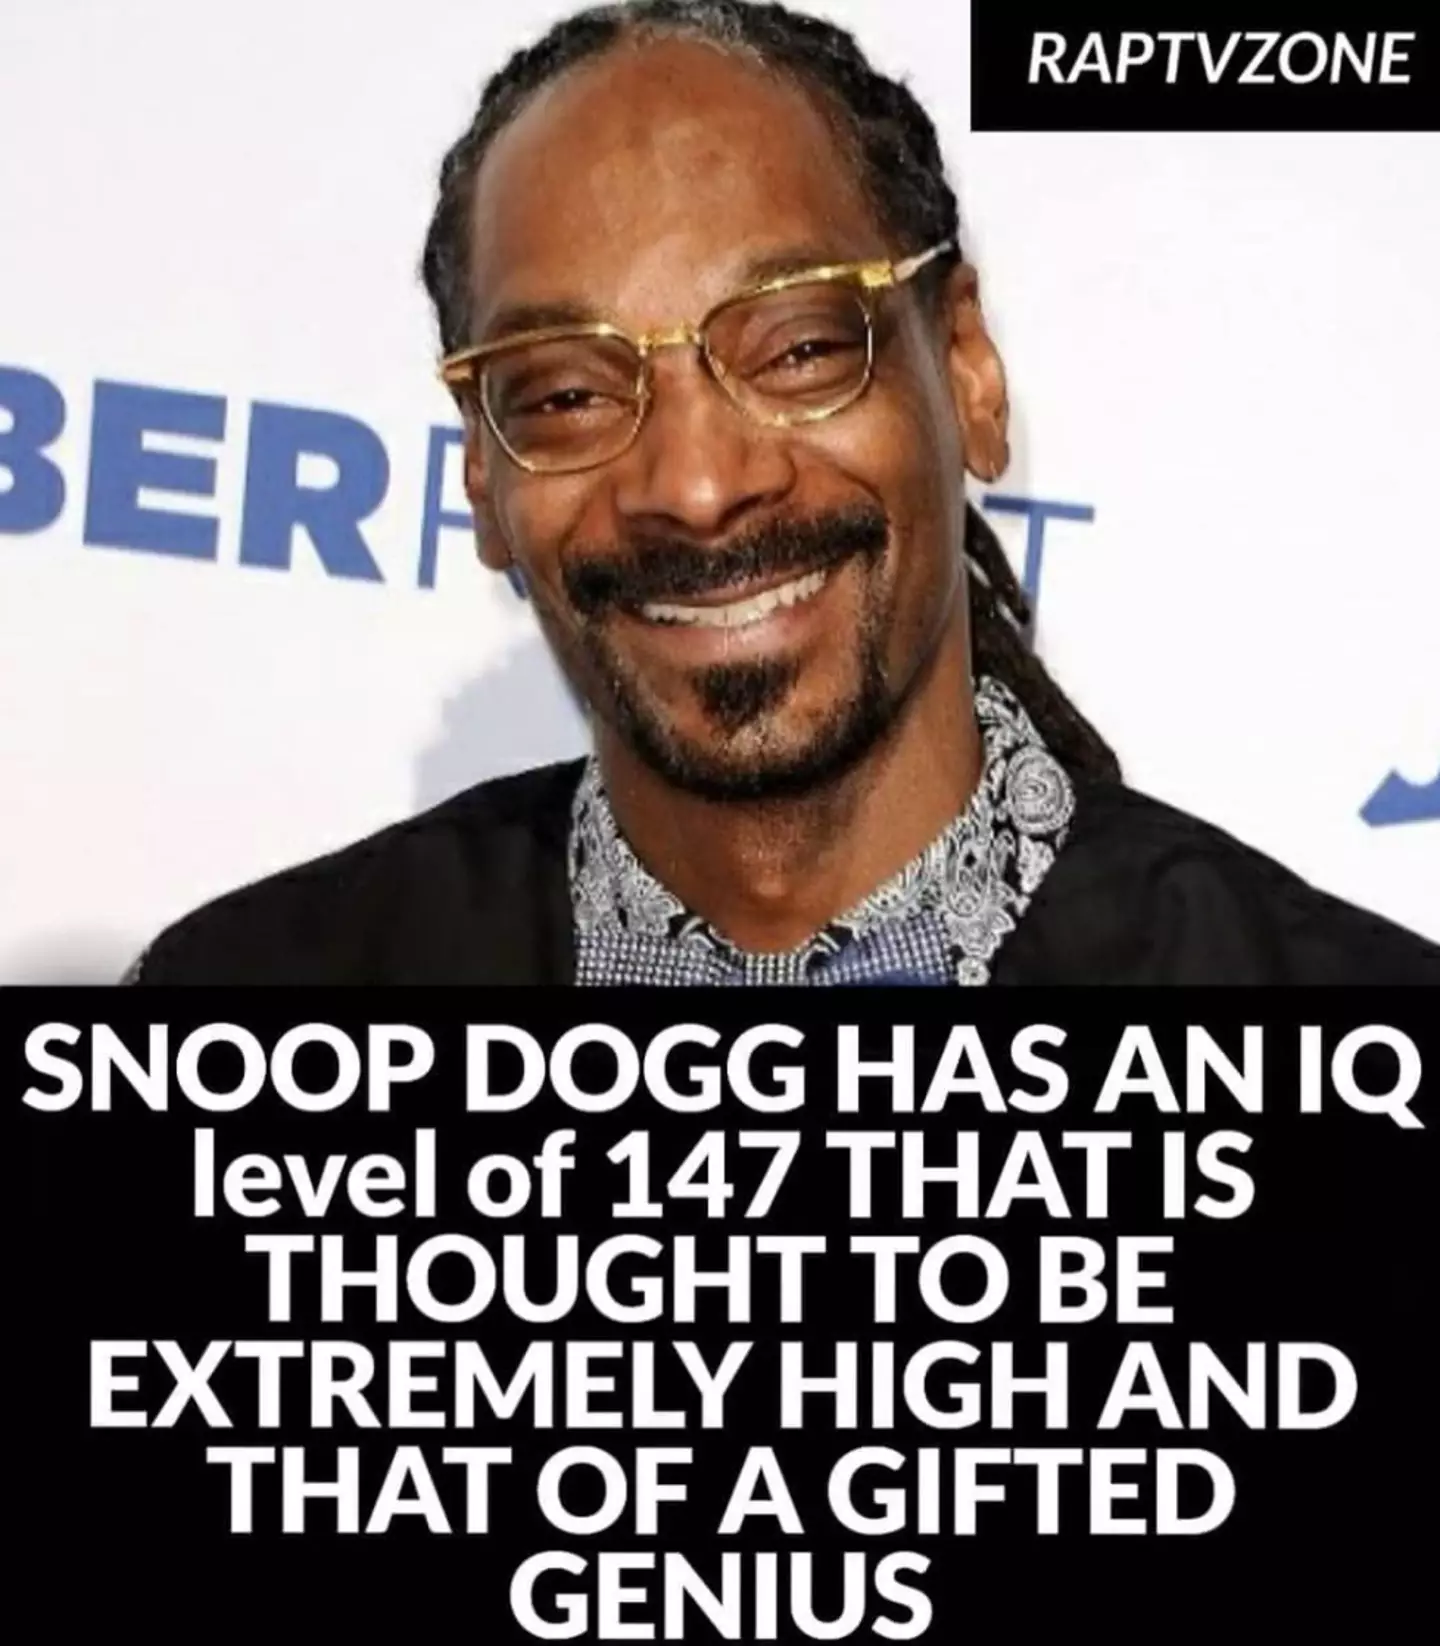 Snoop Dogg is considered a genius due to his high IQ.